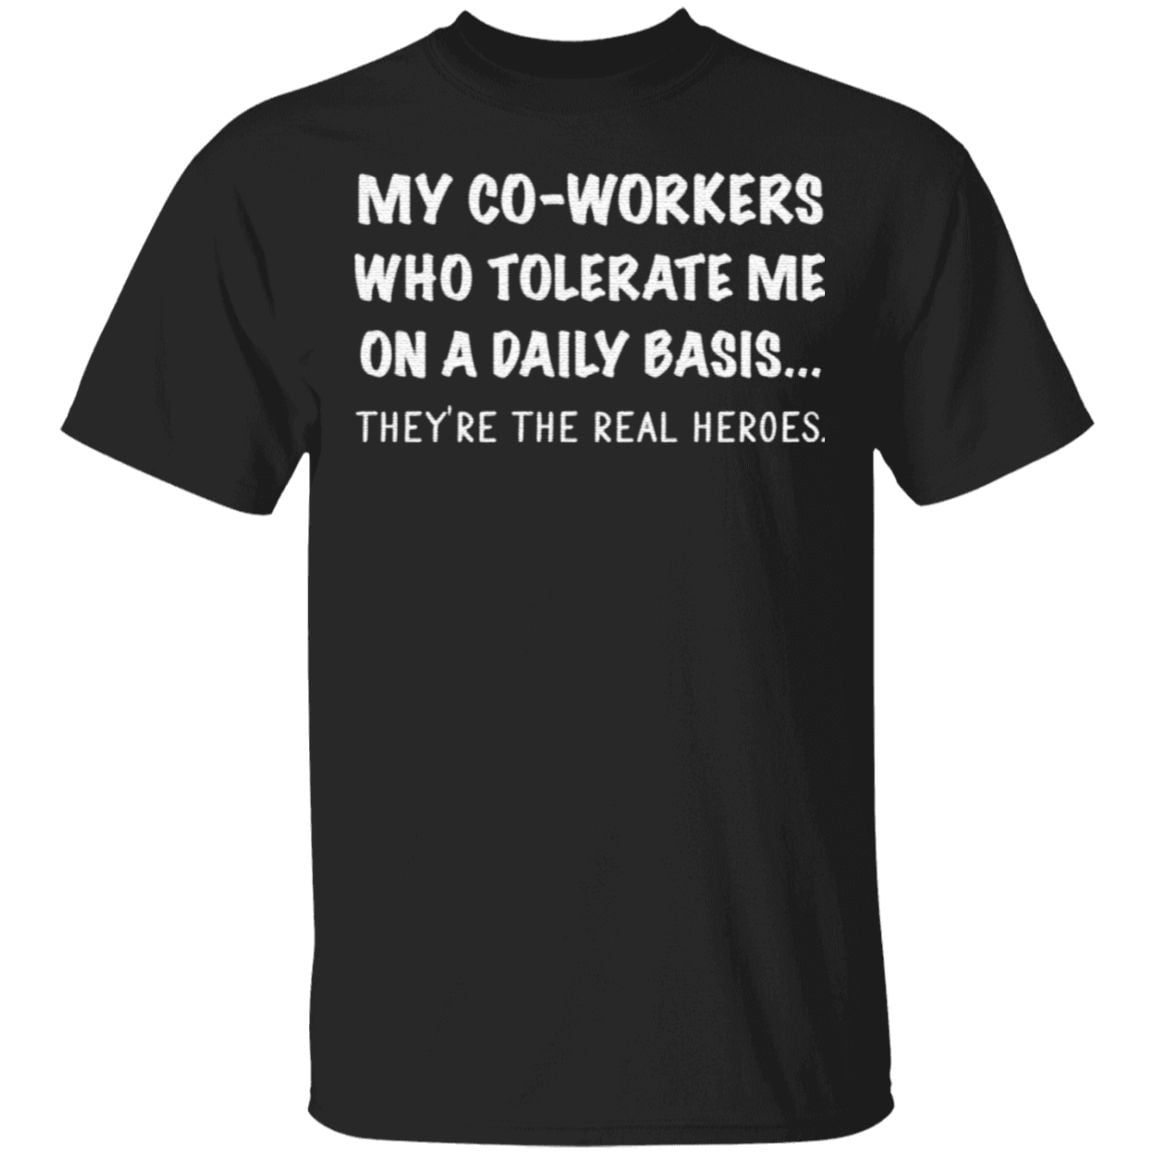 My co-workers who tolerate me on a daily basis they’re the real heroes t shirt